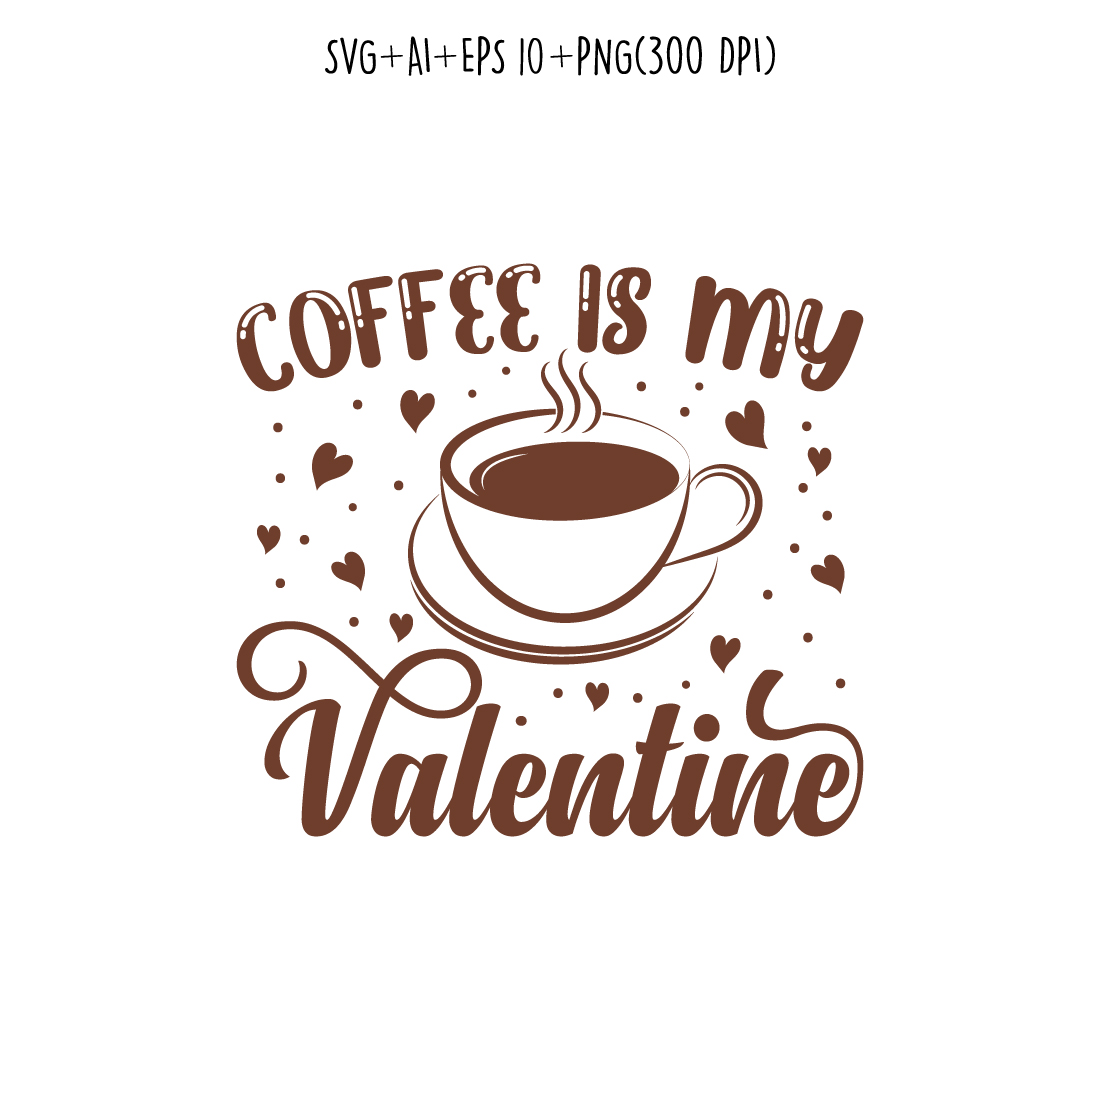 coffee is my valentine coffee typography design for t-shirts, print, templates, logos, mug preview image.